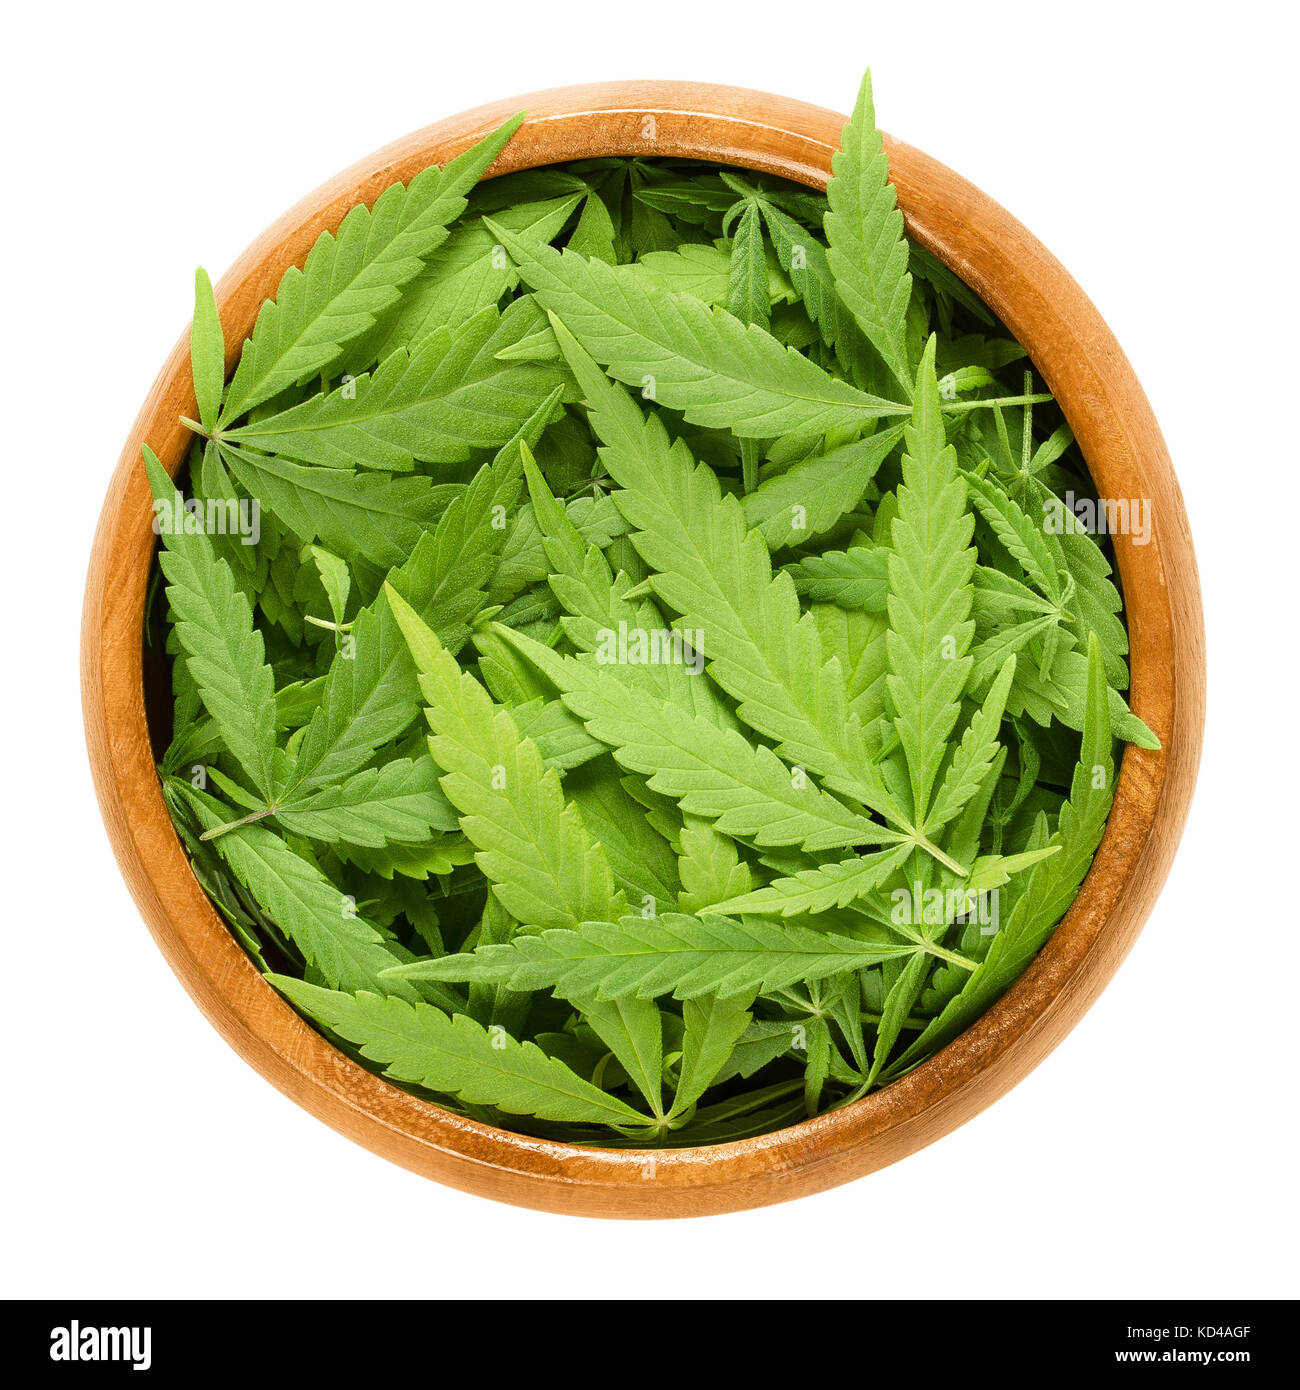 Cannabis fan leaves in wooden bowl. Fresh hemp leaves of Cannabis ruderalis. Low THC species used as tea and in traditional folk medicine. Photo. Stock Photo